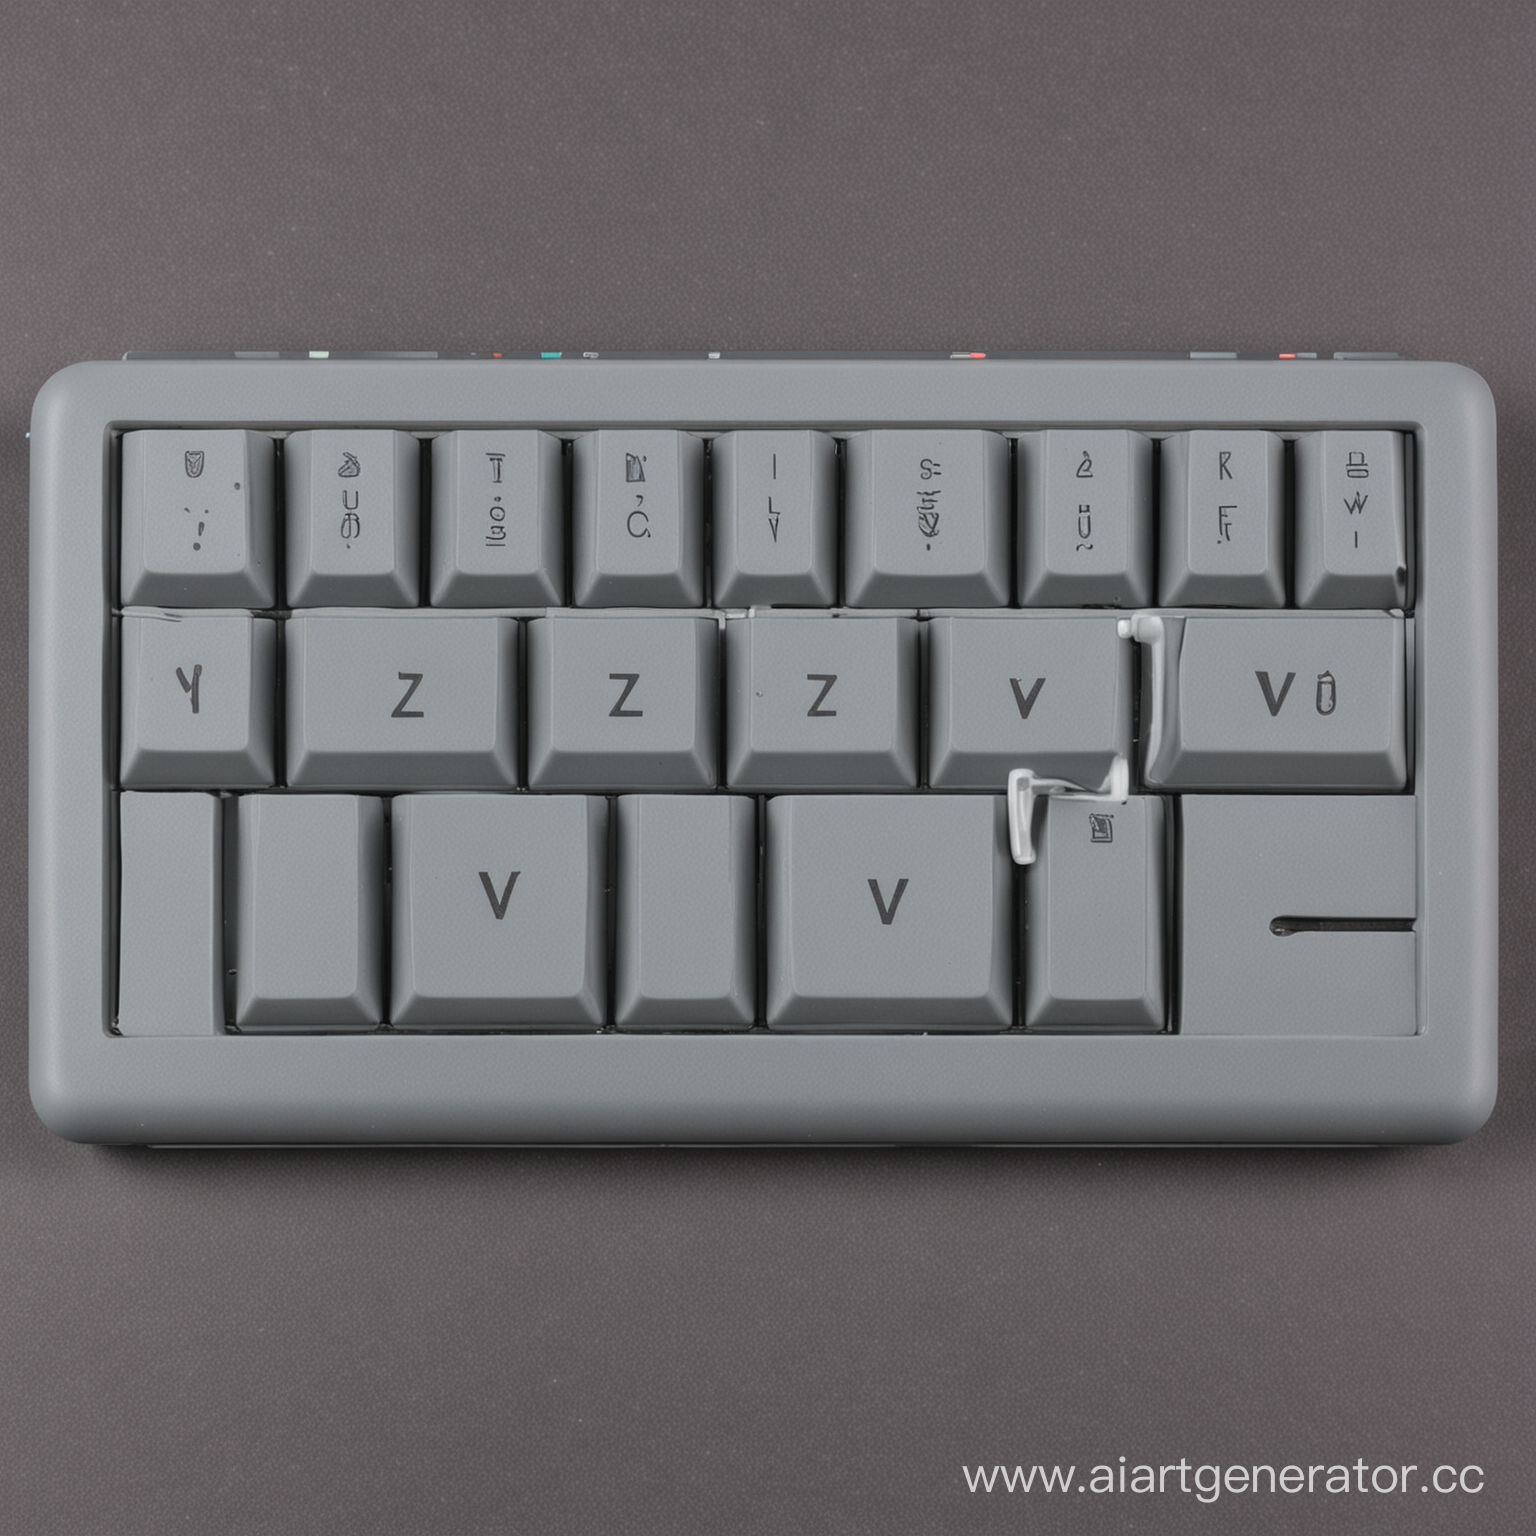 Keyboard only with 2 buttons Z and V
